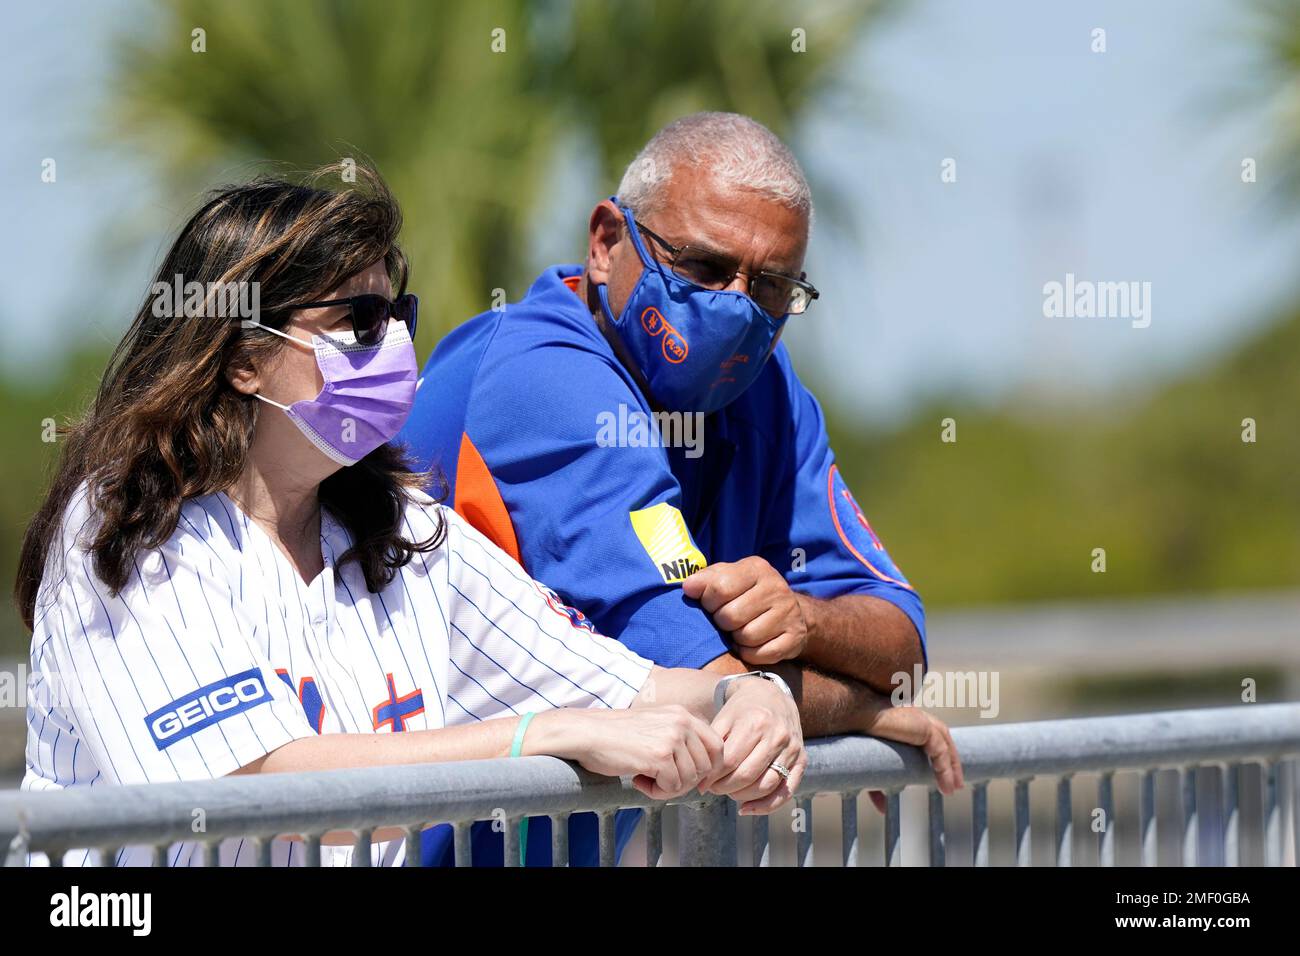 New York Mets fans watch players warm up before a spring training baseball game against the St. Louis Cardinals, Sunday, March 14, 2021, in Port St